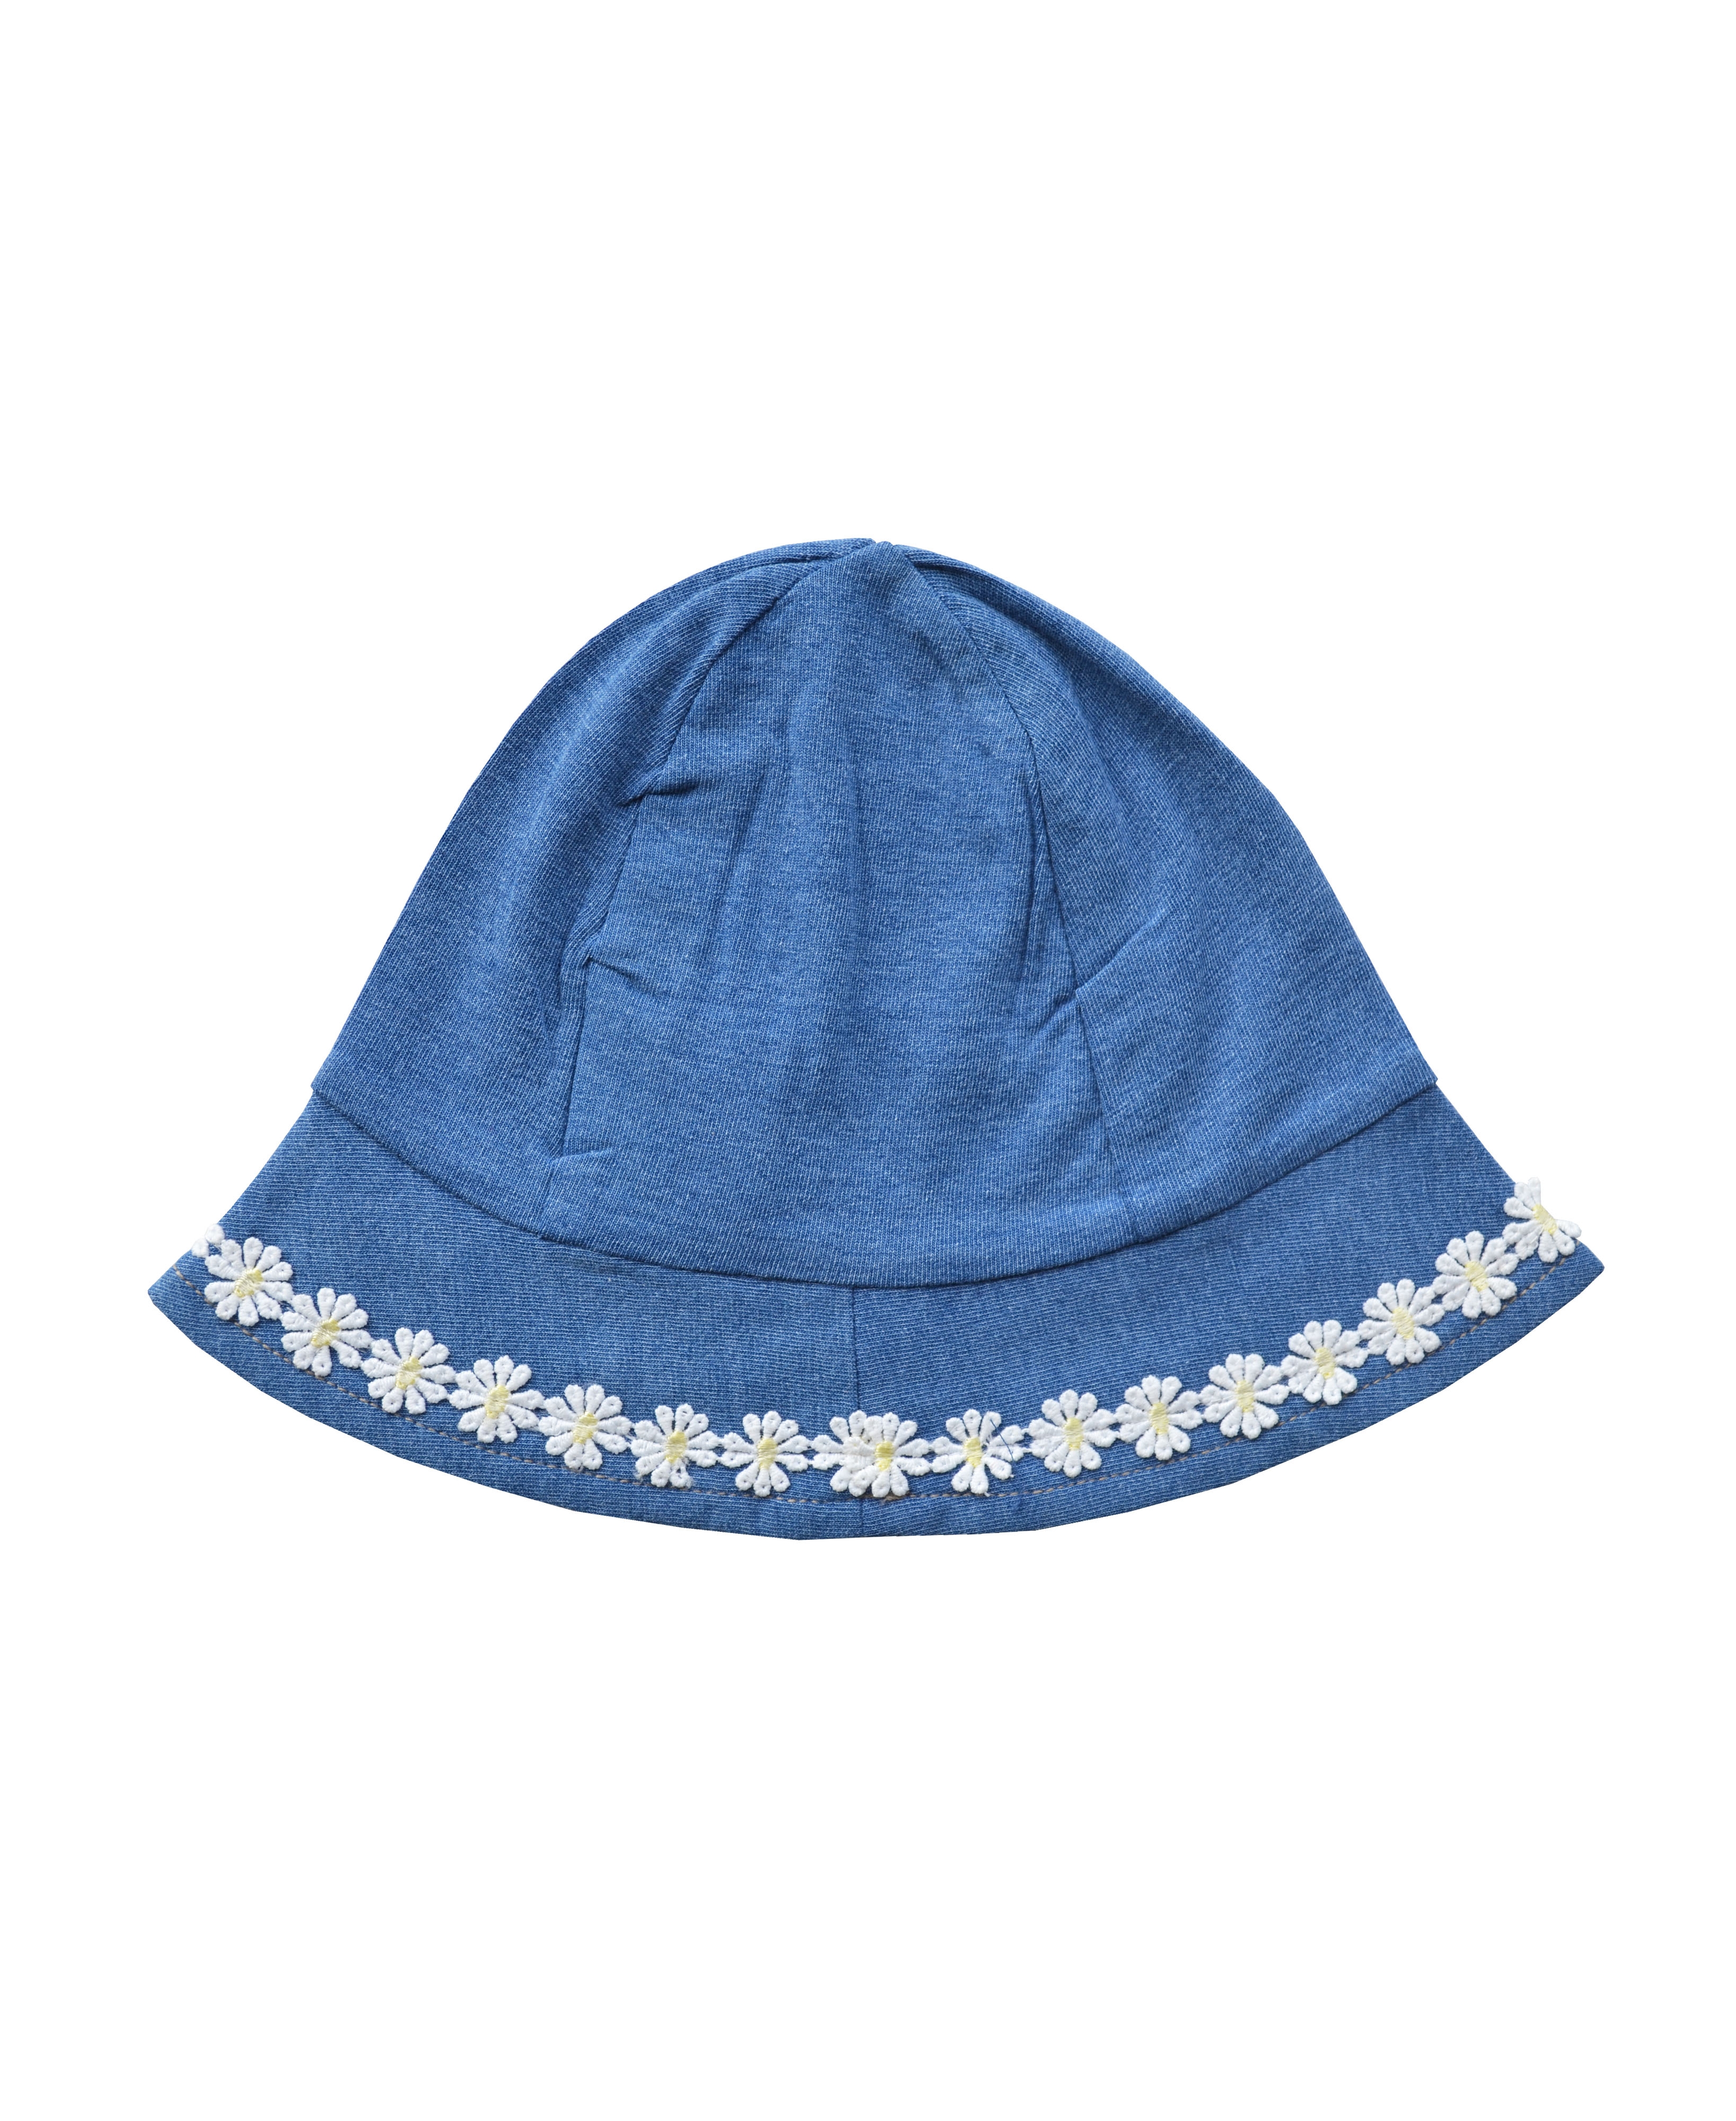 Girls Denim Sunhat with White Flower Embroidery(95% Cotton 5% Elasthan)